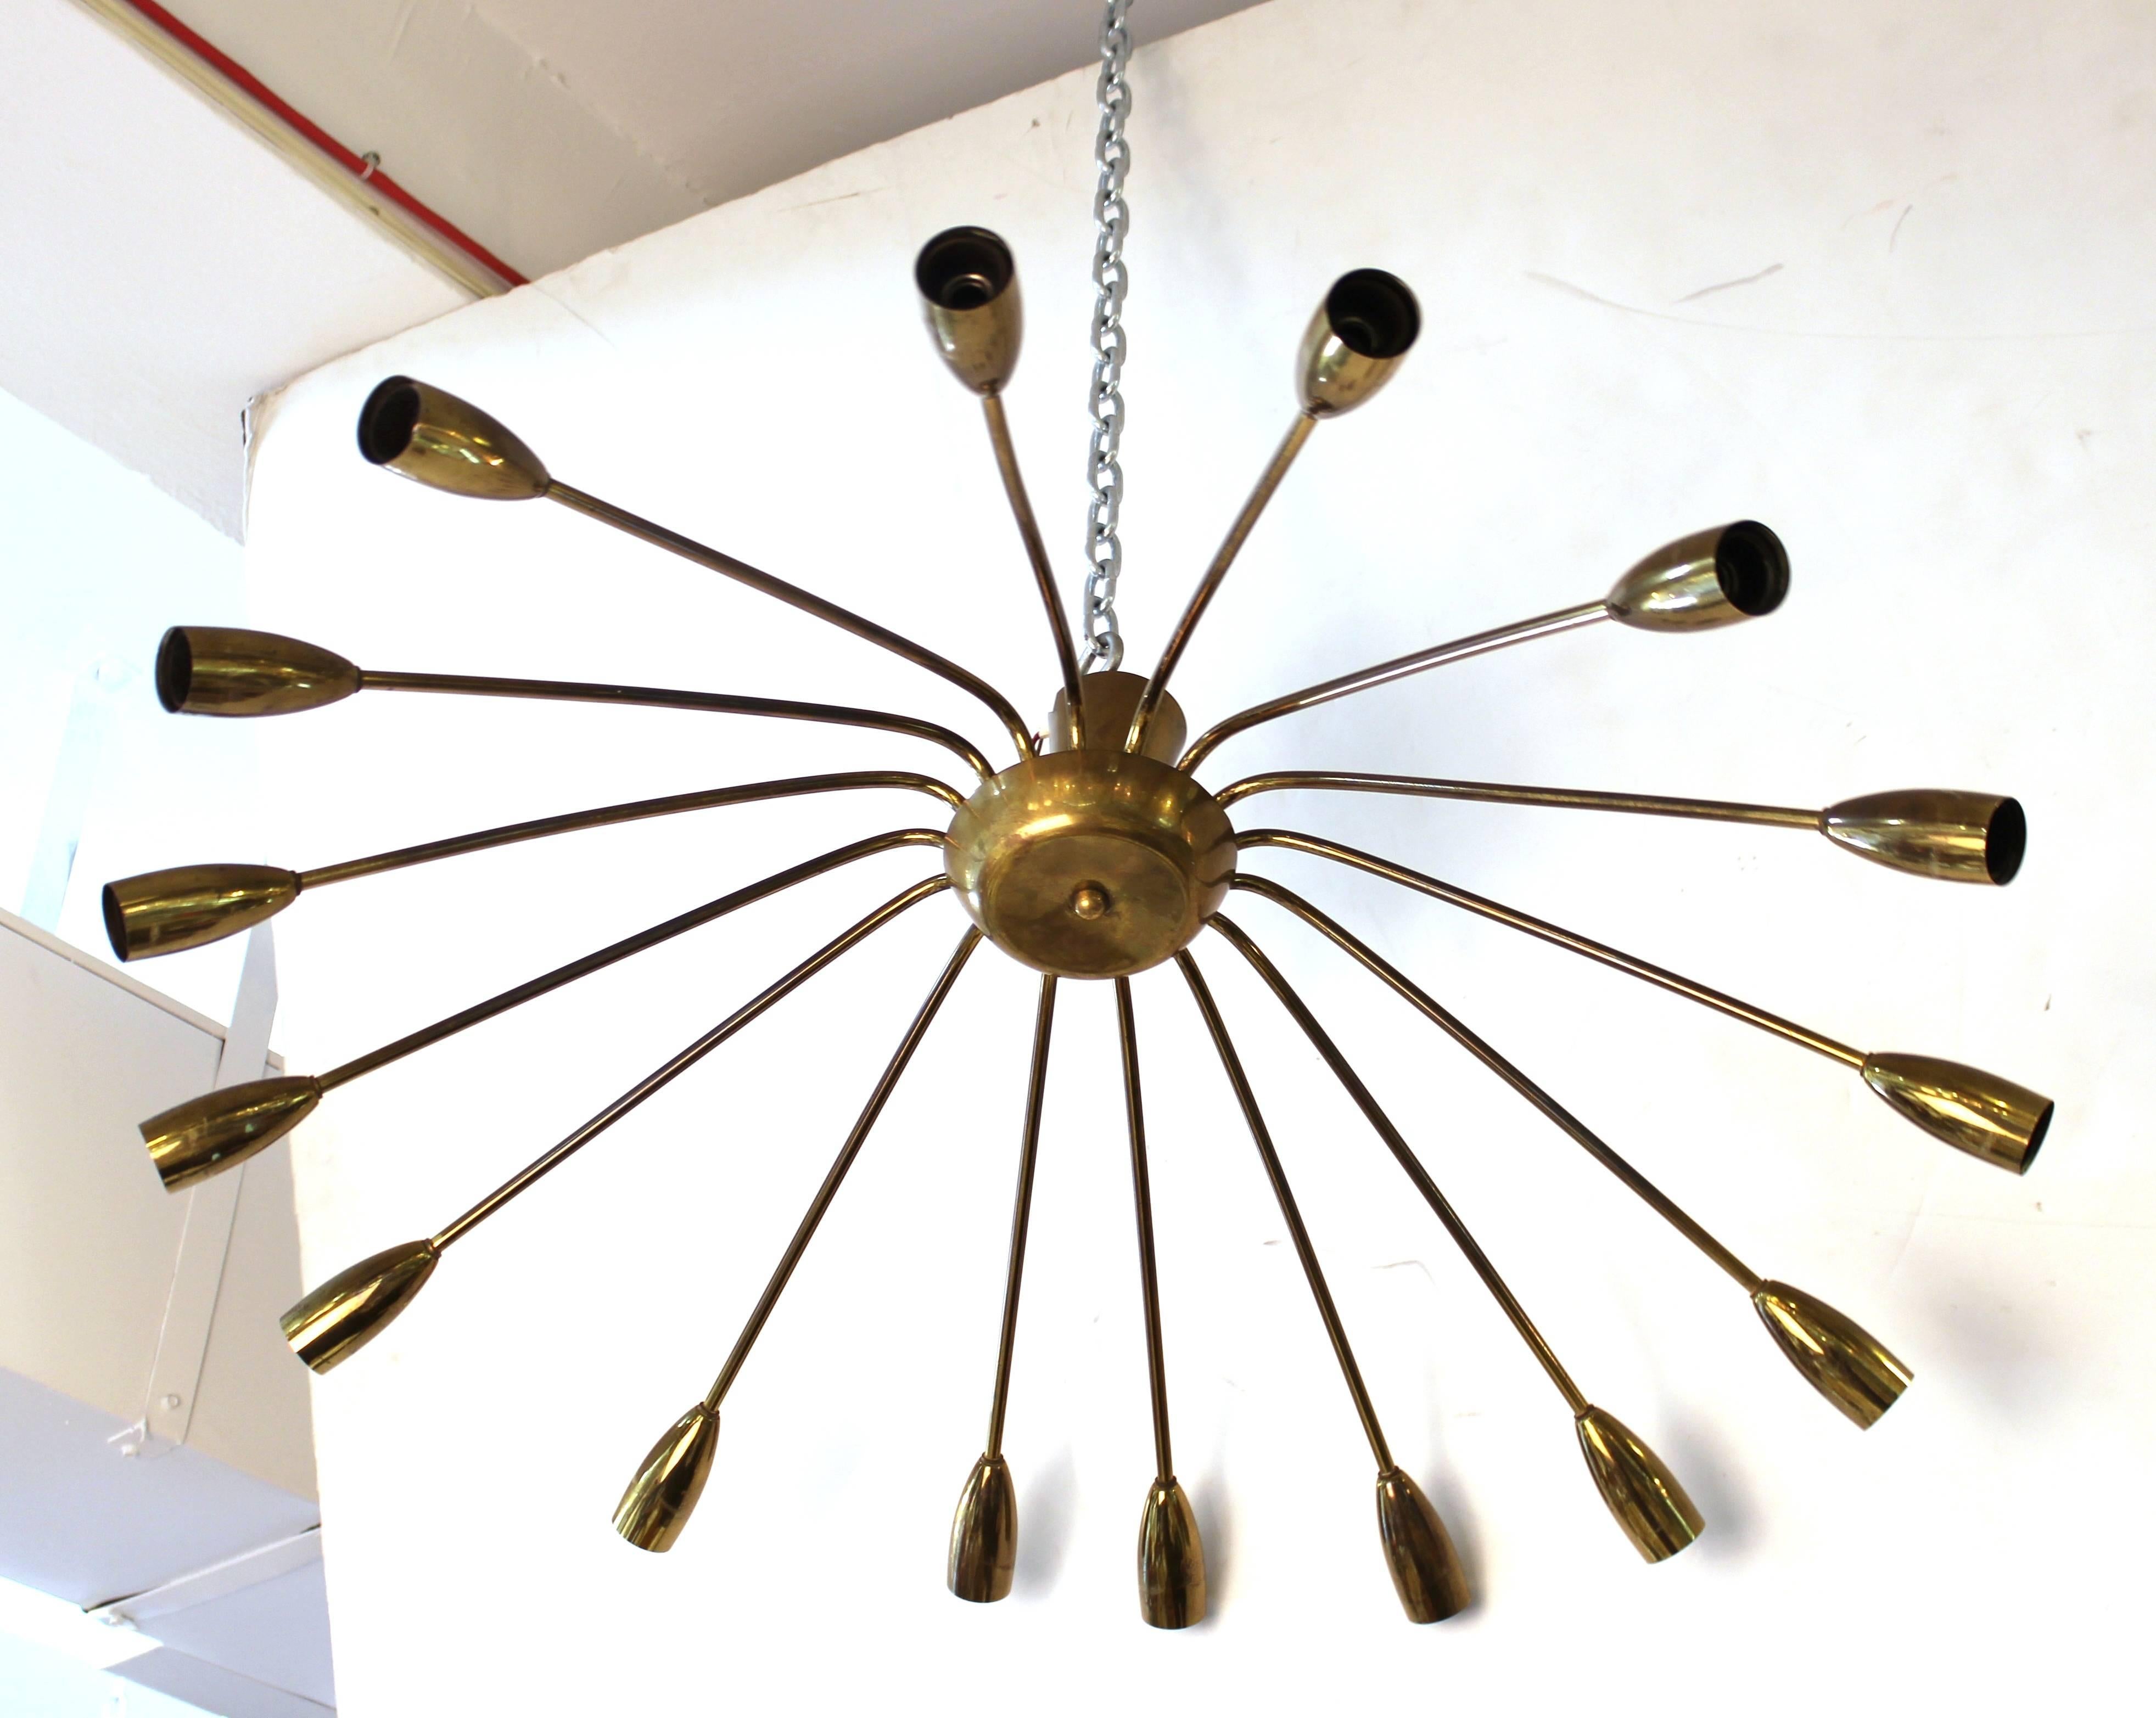 A Mid-Century Modern spider chandelier in metal, made in Europe. The piece has 16 individual arms and is in good vintage condition.